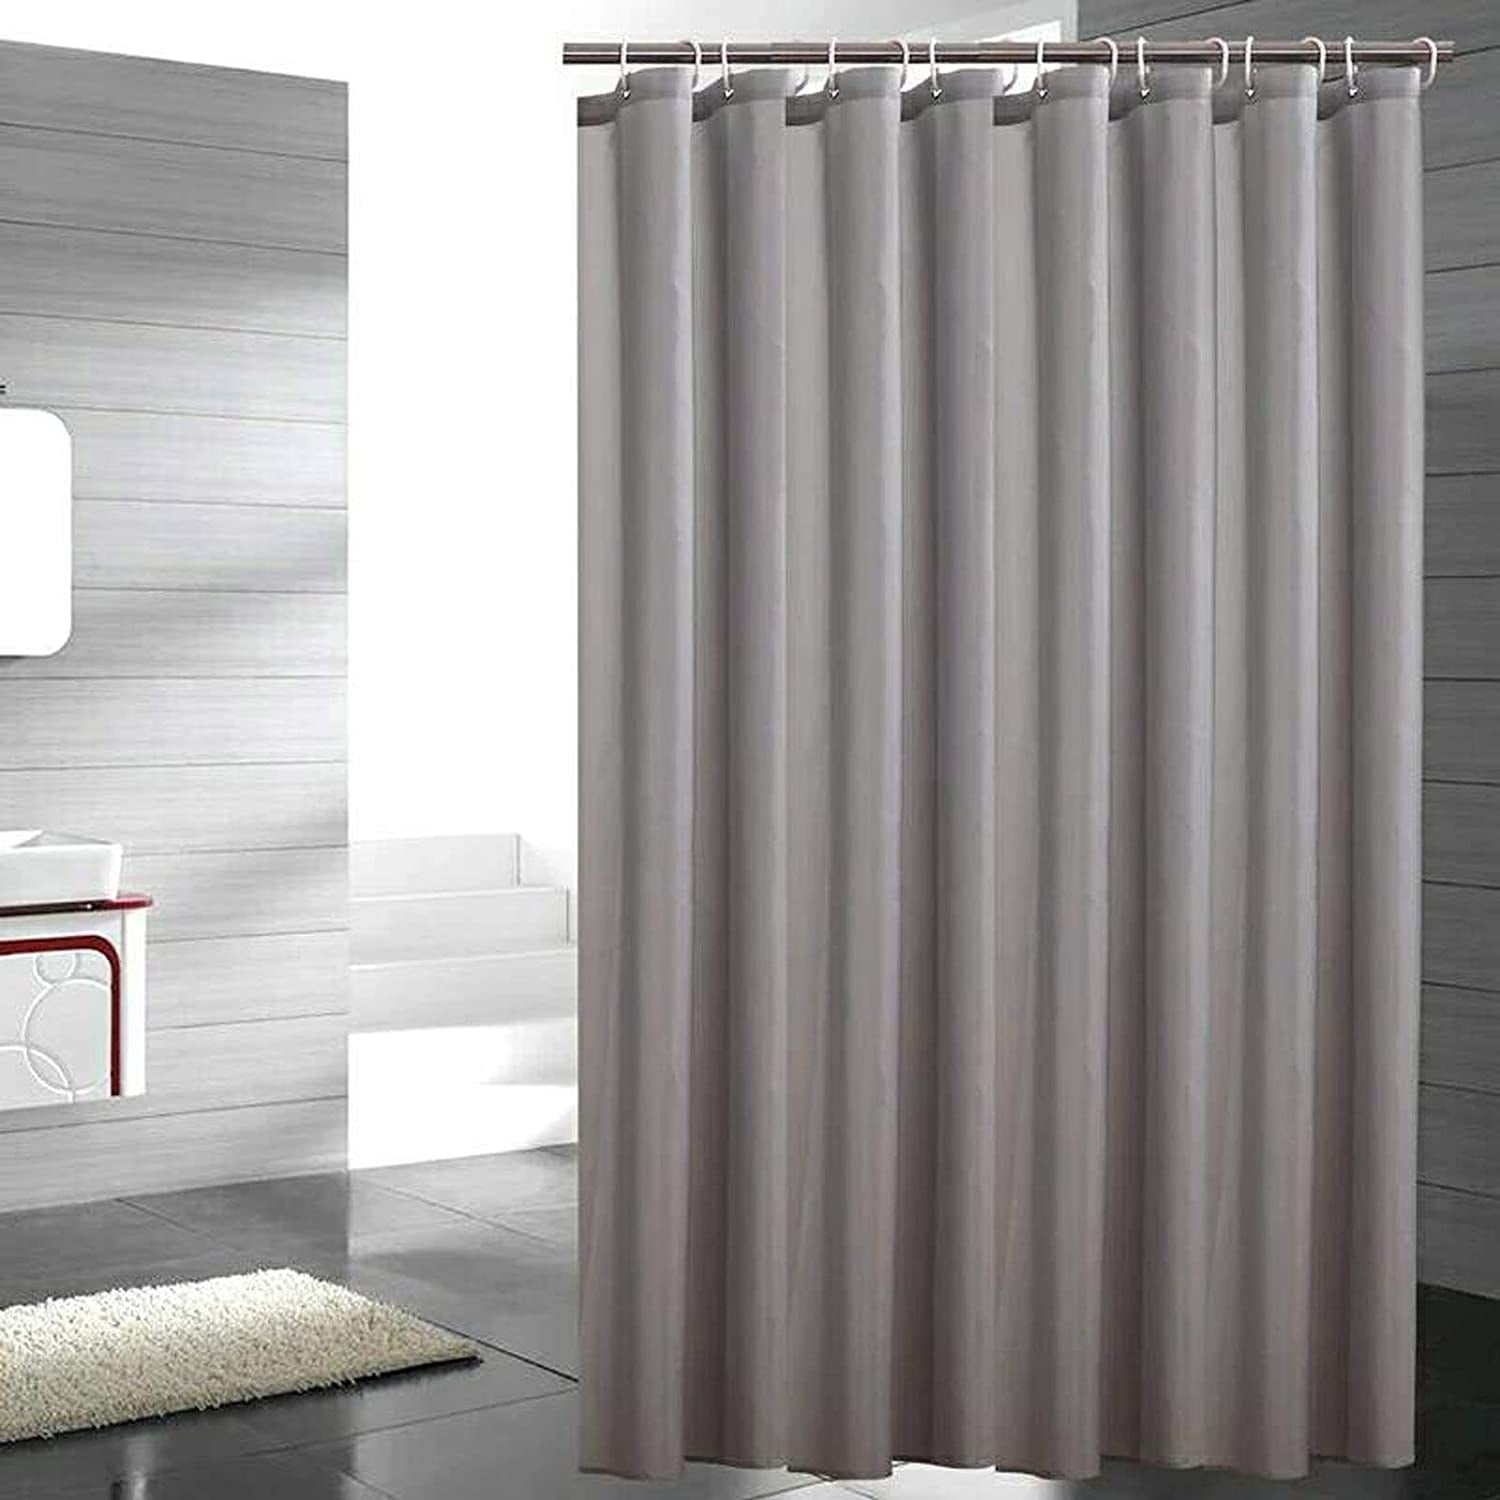 Hotel Quality Standard Shower Curtain Liner Fabric 72 x 72 inch Full Size NIUTA Shower Liner Bathroom Curtains with Grommets Washable,Water Proof